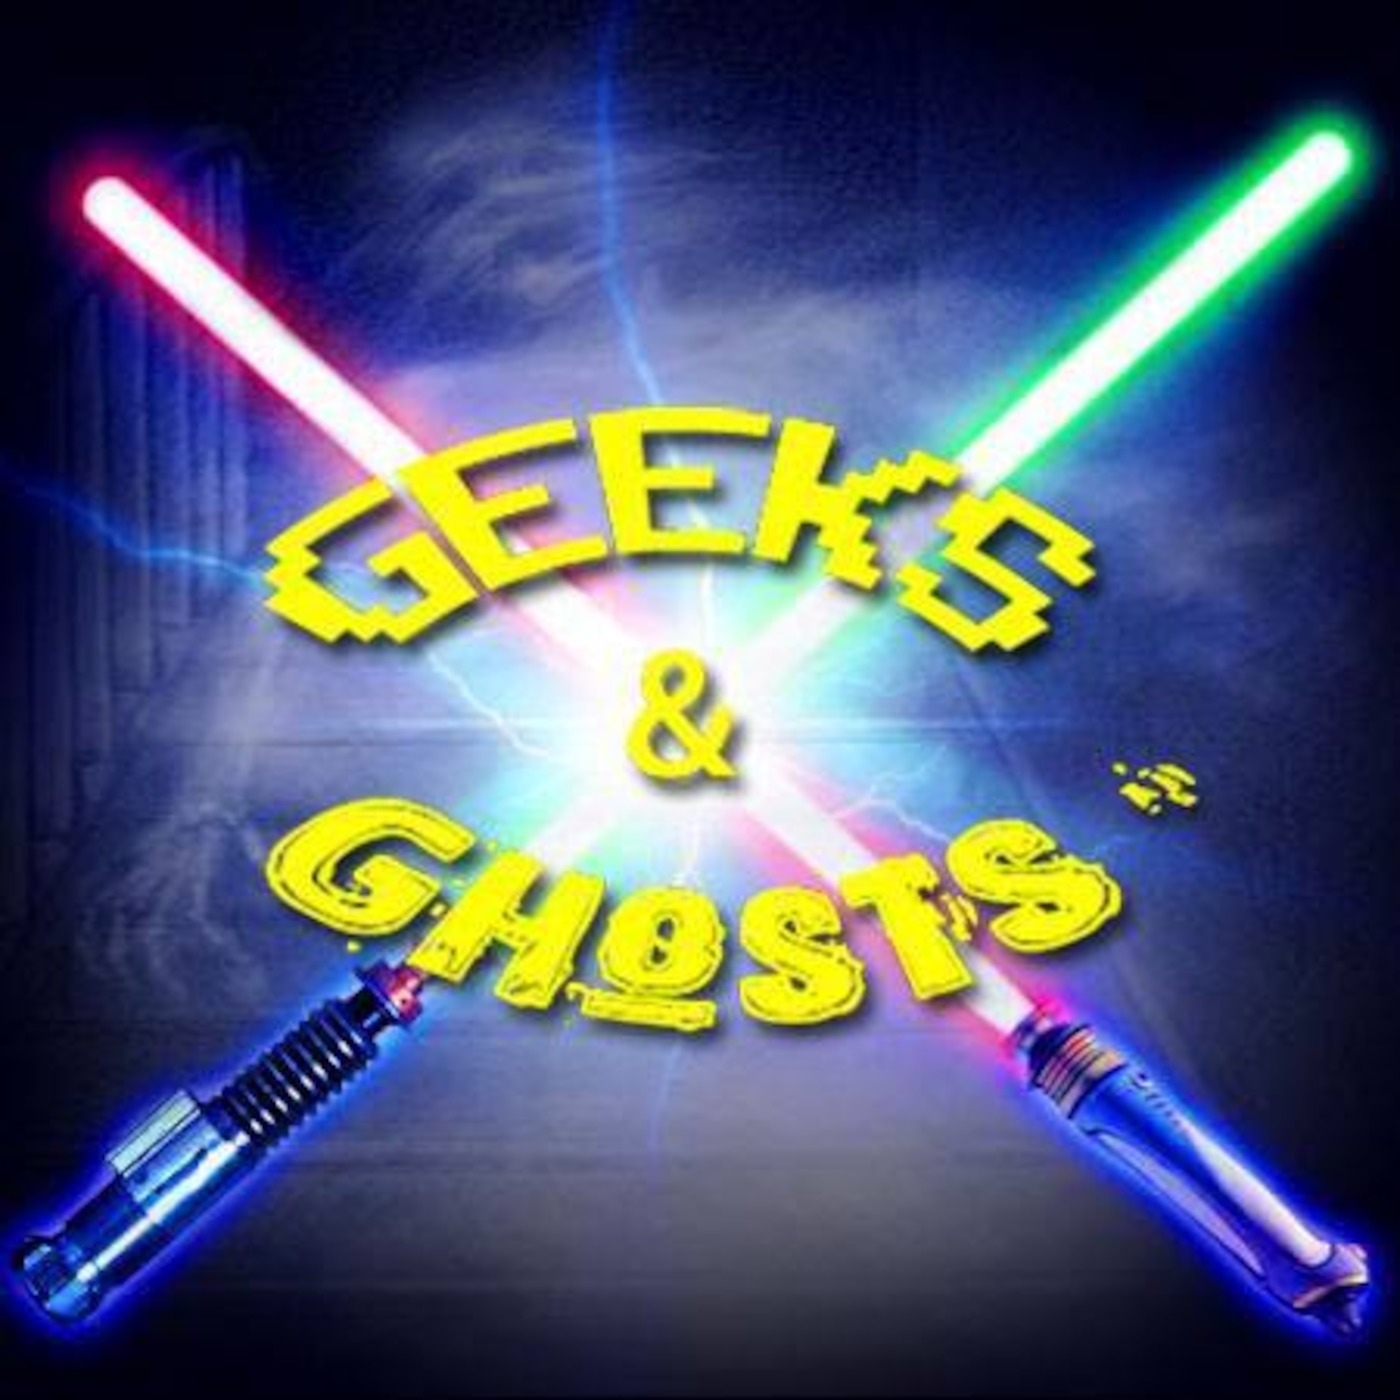 6/26/2016 Kenny Biddle and Luis Castillo of Geeks and Ghosts